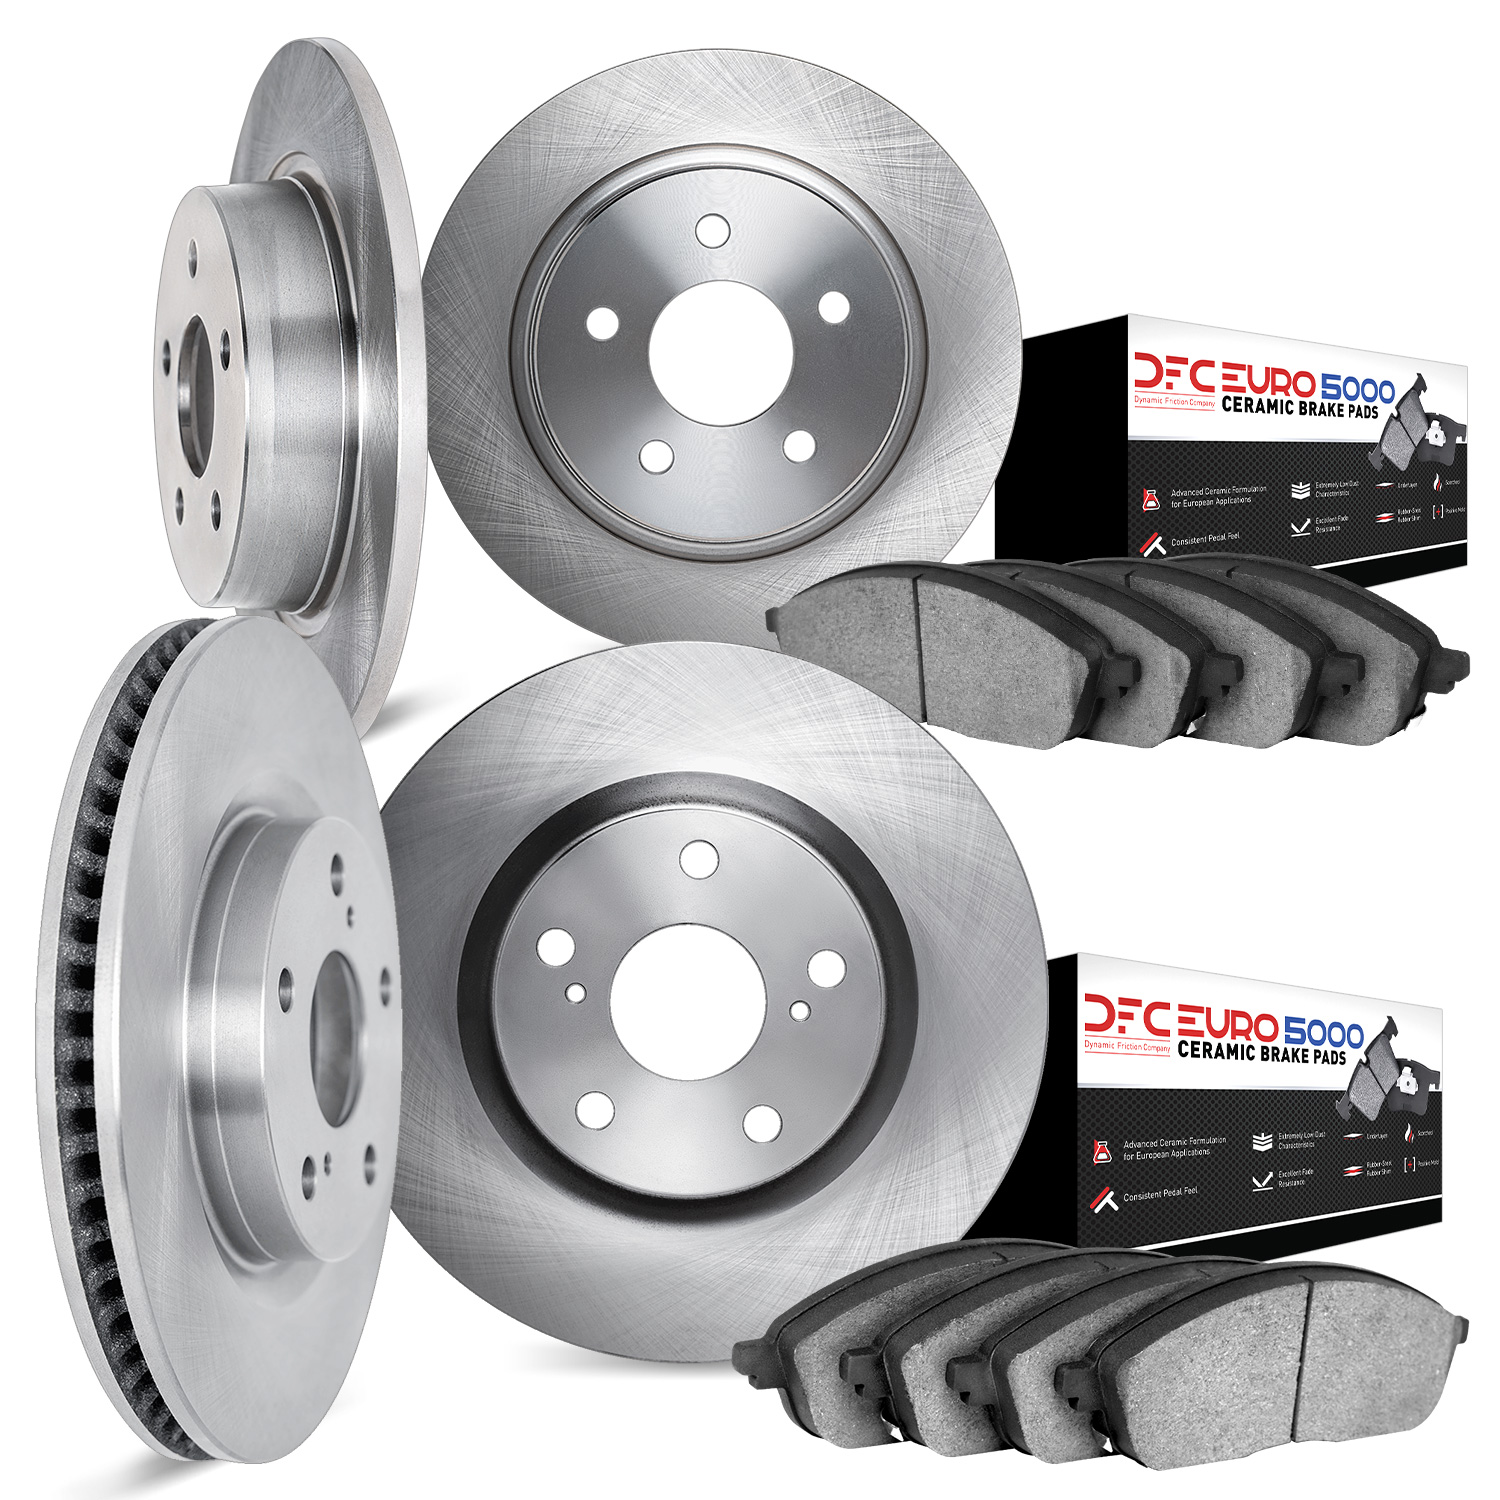 6604-31004 Brake Rotors w/5000 Euro Ceramic Brake Pads, 1987-1988 BMW, Position: Front and Rear